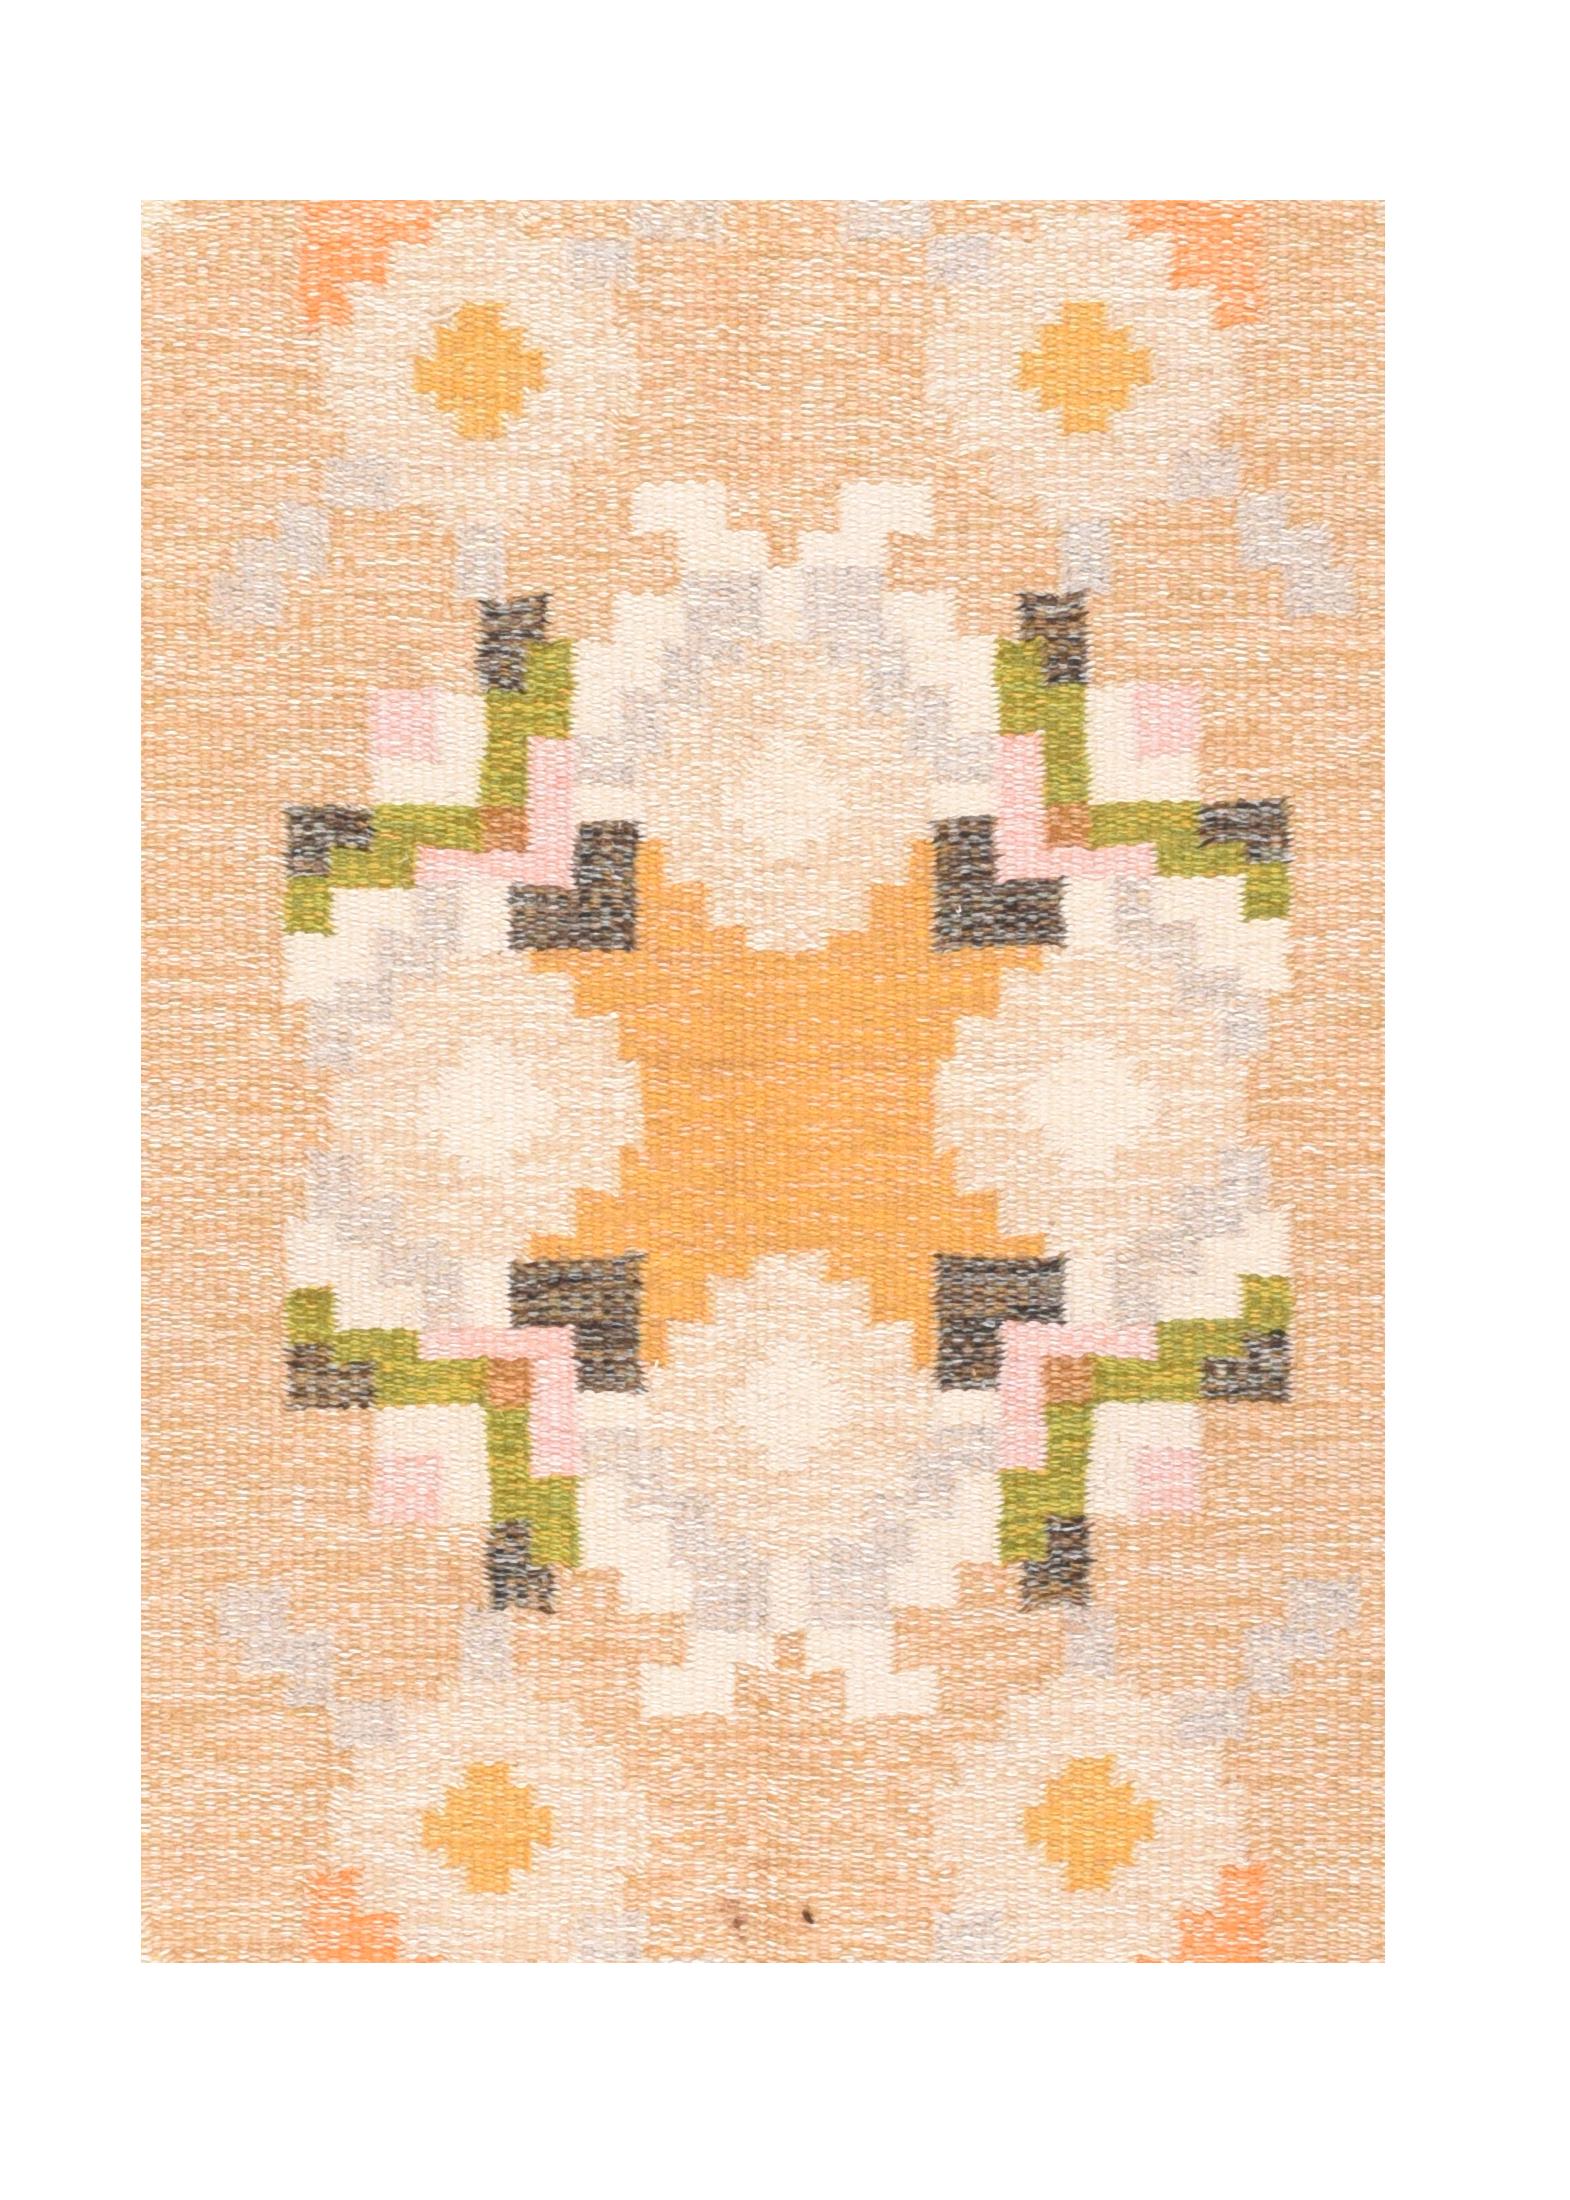 Fine vintage Swedish rug/carpet, hand knotted, circa 1950s

Design: Floral

Carpets and rugs have been handmade knotted wool in Sweden for centuries, taking on many different forms and functions over the course of time. Rugs woven in the